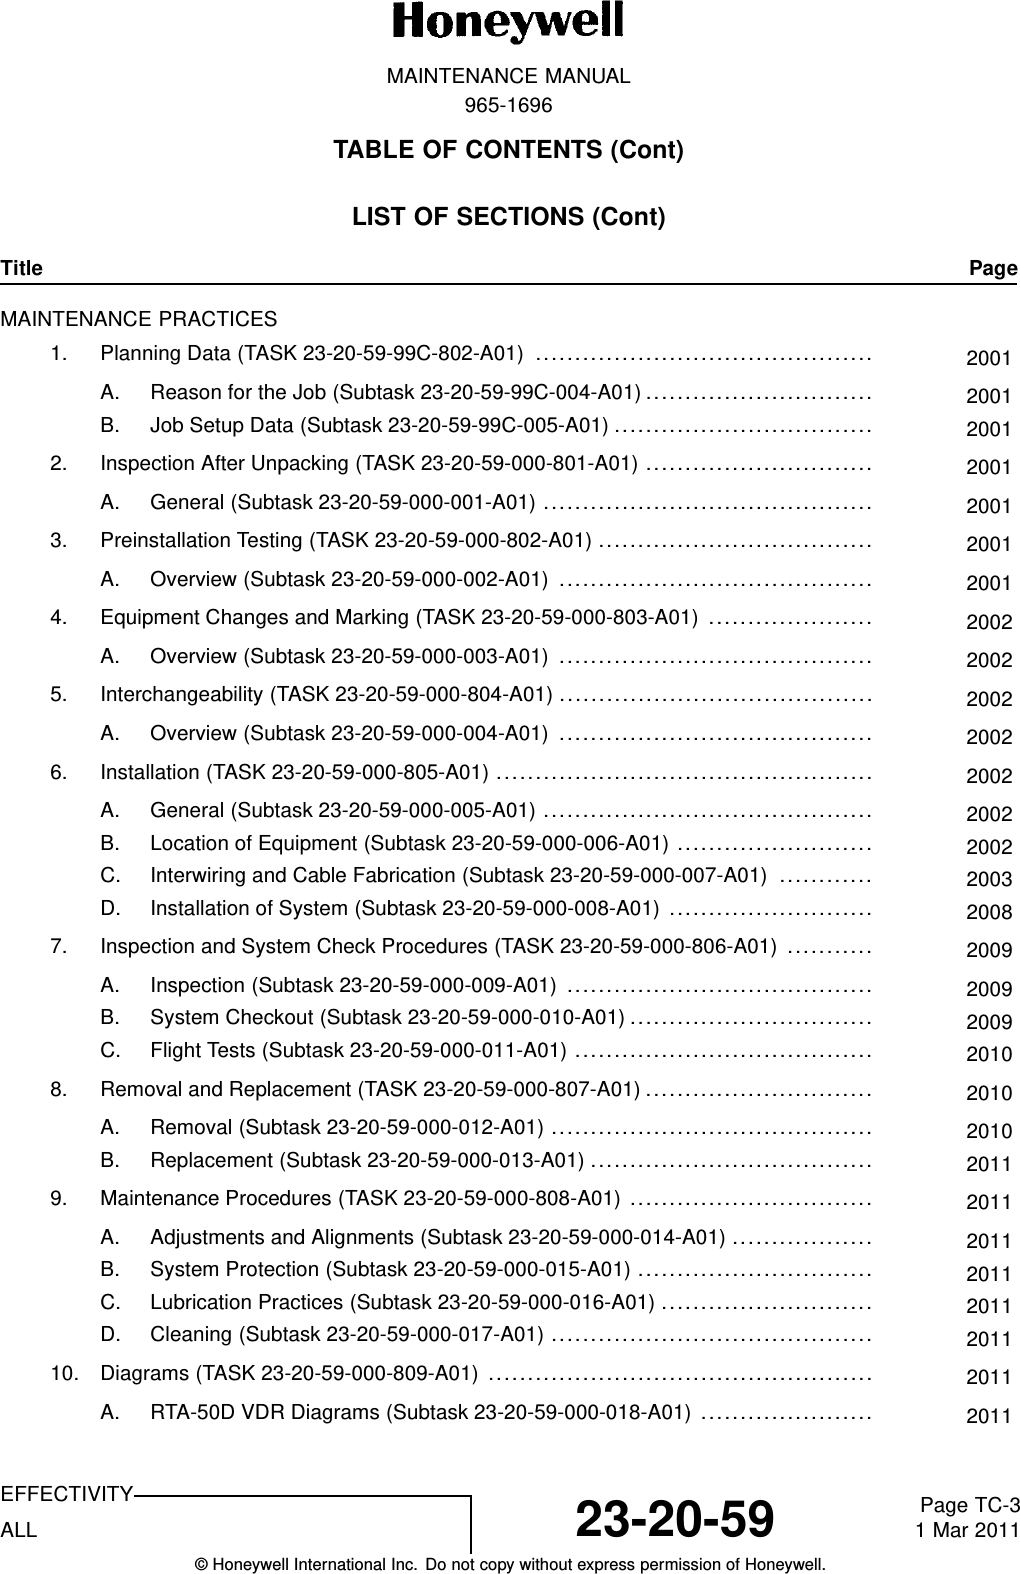 MAINTENANCE MANUAL965-1696TABLE OF CONTENTS (Cont)LIST OF SECTIONS (Cont)Title PageMAINTENANCE PRACTICES1. Planning Data (TASK 23-20-59-99C-802-A01) ........................................... 2001A. Reason for the Job (Subtask 23-20-59-99C-004-A01)............................. 2001B. Job Setup Data (Subtask 23-20-59-99C-005-A01) ................................. 20012. Inspection After Unpacking (TASK 23-20-59-000-801-A01) ............................. 2001A. General (Subtask 23-20-59-000-001-A01) .......................................... 20013. Preinstallation Testing (TASK 23-20-59-000-802-A01) ................................... 2001A. Overview (Subtask 23-20-59-000-002-A01) ........................................ 20014. Equipment Changes and Marking (TASK 23-20-59-000-803-A01) ..................... 2002A. Overview (Subtask 23-20-59-000-003-A01) ........................................ 20025. Interchangeability (TASK 23-20-59-000-804-A01) ........................................ 2002A. Overview (Subtask 23-20-59-000-004-A01) ........................................ 20026. Installation (TASK 23-20-59-000-805-A01) ................................................ 2002A. General (Subtask 23-20-59-000-005-A01) .......................................... 2002B. Location of Equipment (Subtask 23-20-59-000-006-A01) ......................... 2002C. Interwiring and Cable Fabrication (Subtask 23-20-59-000-007-A01) ............ 2003D. Installation of System (Subtask 23-20-59-000-008-A01) .......................... 20087. Inspection and System Check Procedures (TASK 23-20-59-000-806-A01) ........... 2009A. Inspection (Subtask 23-20-59-000-009-A01) ....................................... 2009B. System Checkout (Subtask 23-20-59-000-010-A01)............................... 2009C. Flight Tests (Subtask 23-20-59-000-011-A01) ...................................... 20108. Removal and Replacement (TASK 23-20-59-000-807-A01)............................. 2010A. Removal (Subtask 23-20-59-000-012-A01) ......................................... 2010B. Replacement (Subtask 23-20-59-000-013-A01) .................................... 20119. Maintenance Procedures (TASK 23-20-59-000-808-A01) ............................... 2011A. Adjustments and Alignments (Subtask 23-20-59-000-014-A01) .................. 2011B. System Protection (Subtask 23-20-59-000-015-A01) .............................. 2011C. Lubrication Practices (Subtask 23-20-59-000-016-A01) ........................... 2011D. Cleaning (Subtask 23-20-59-000-017-A01) ......................................... 201110. Diagrams (TASK 23-20-59-000-809-A01) ................................................. 2011A. RTA-50D VDR Diagrams (Subtask 23-20-59-000-018-A01) ...................... 2011EFFECTIVITYALL 23-20-59 Page TC-31 Mar 2011© Honeywell International Inc. Do not copy without express permission of Honeywell.